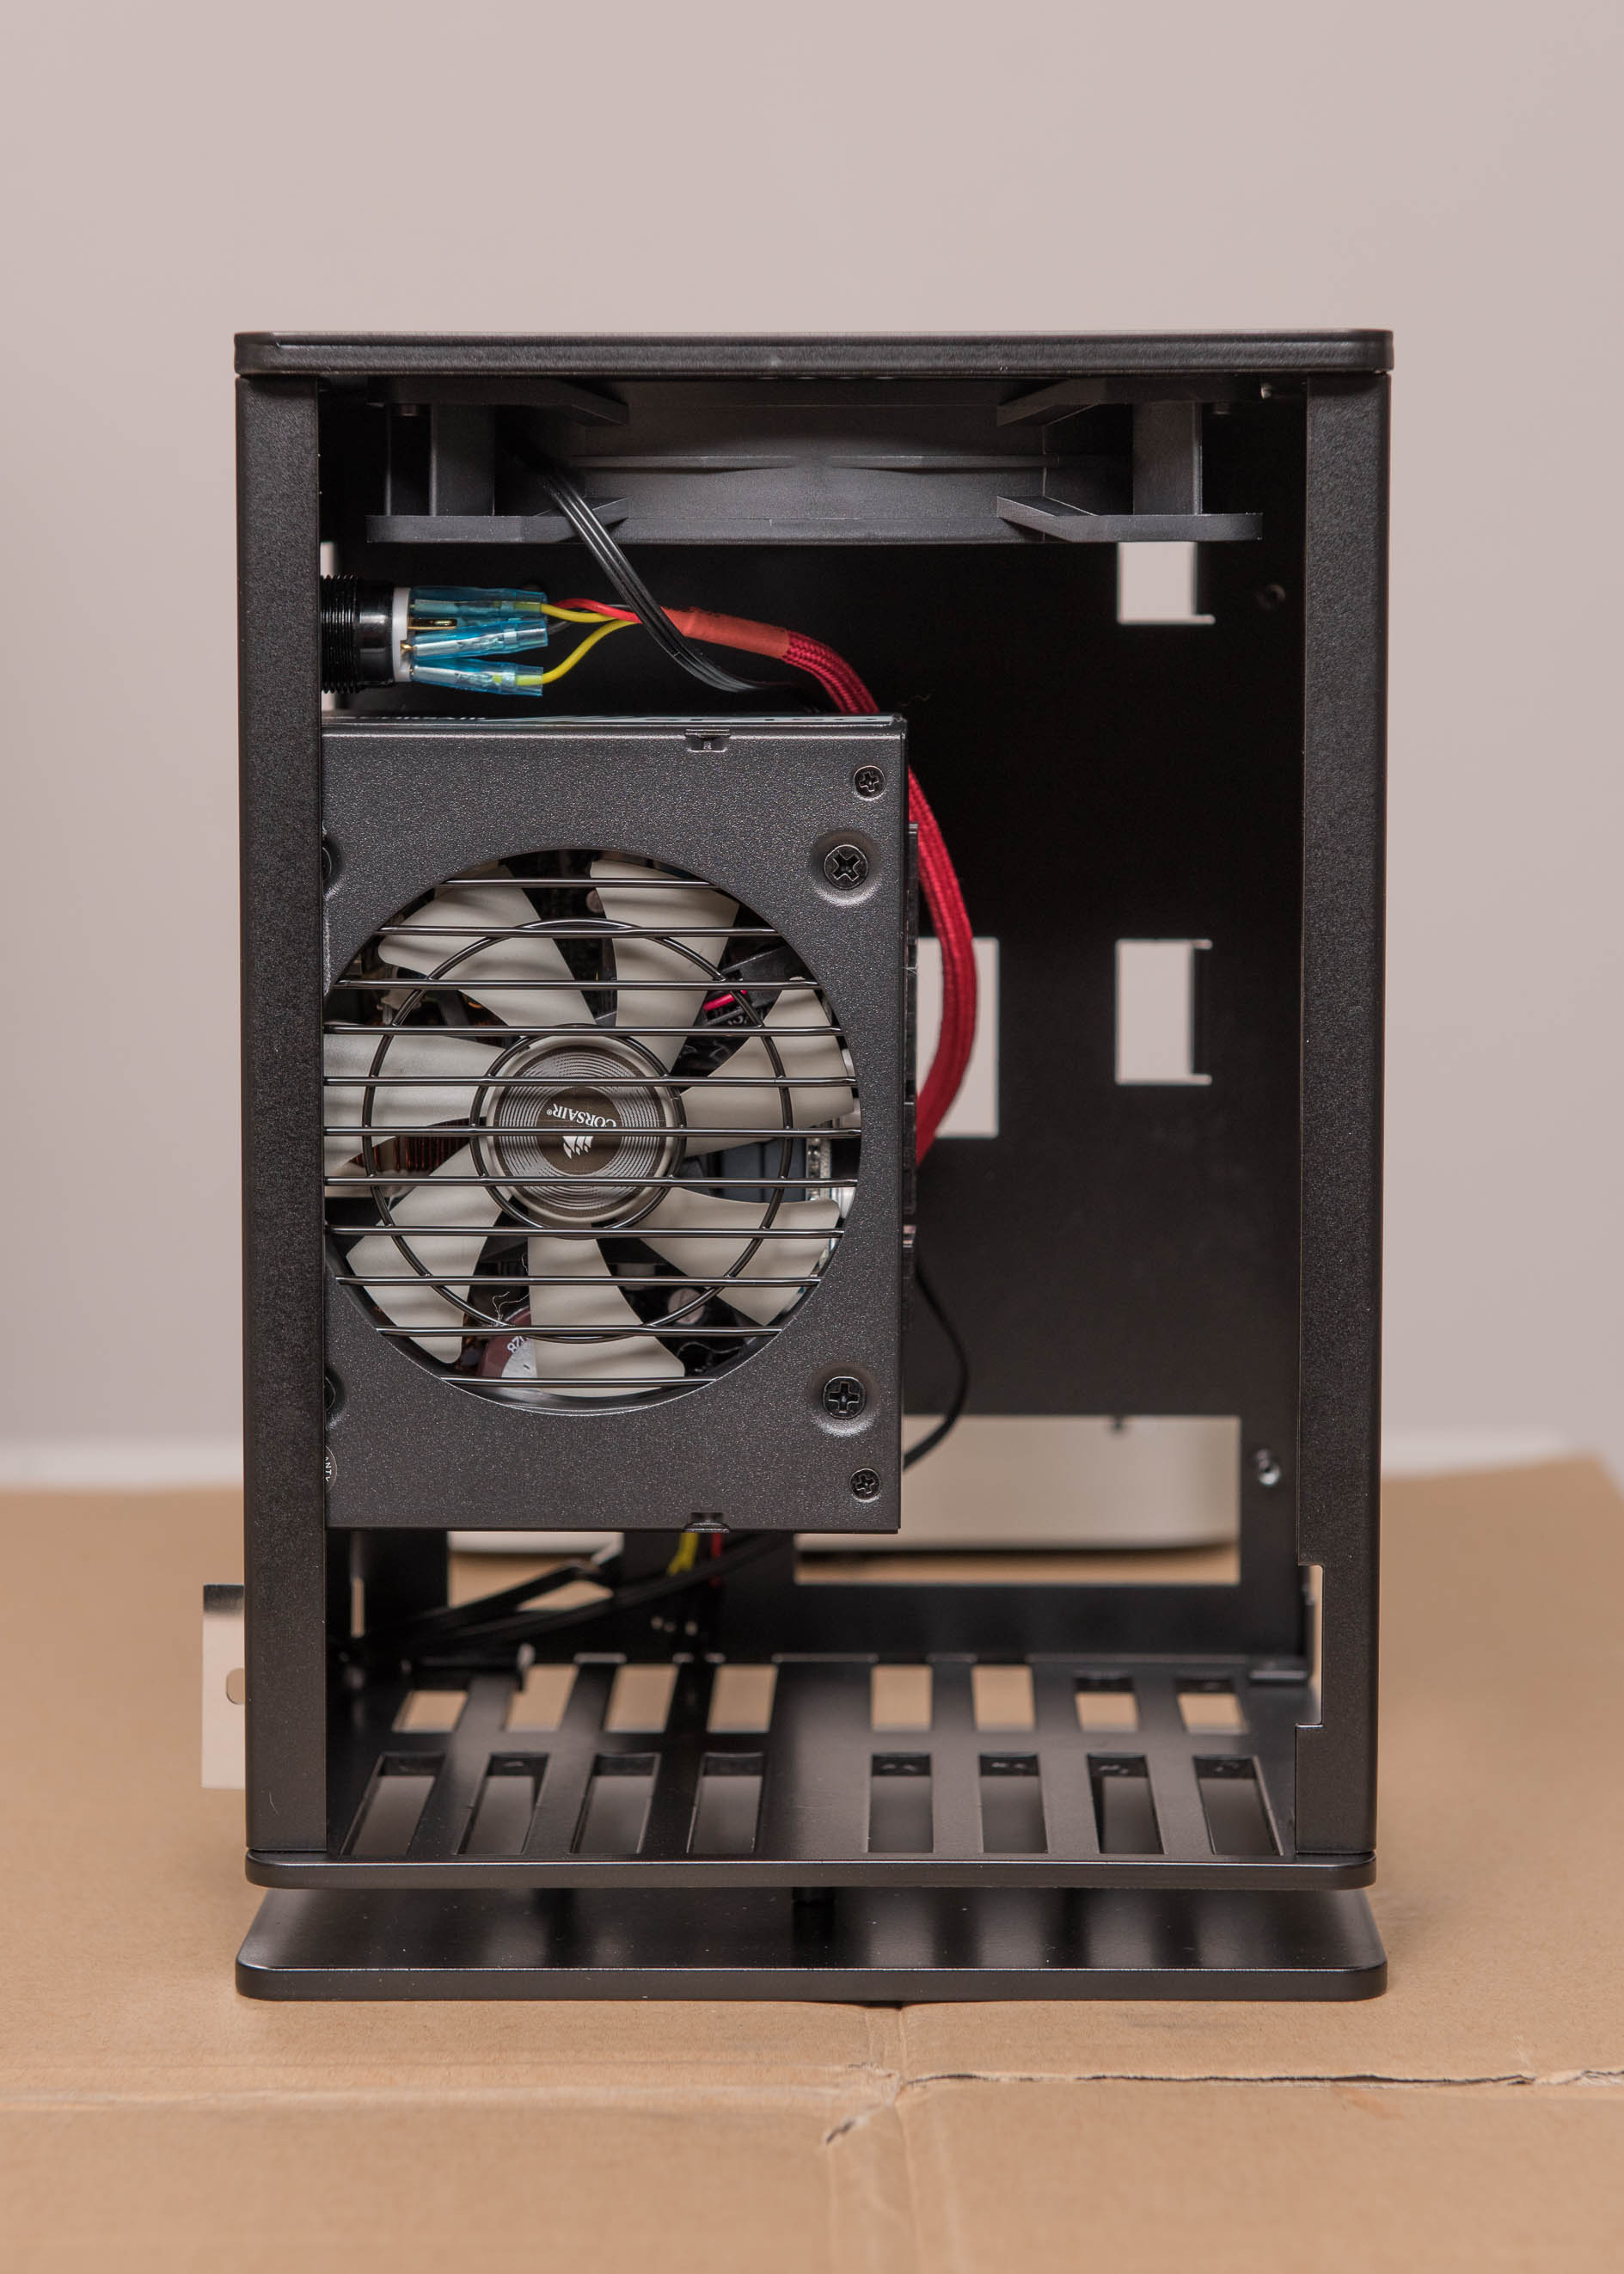 HG Osmi Mini ITX Case with PSU fitted